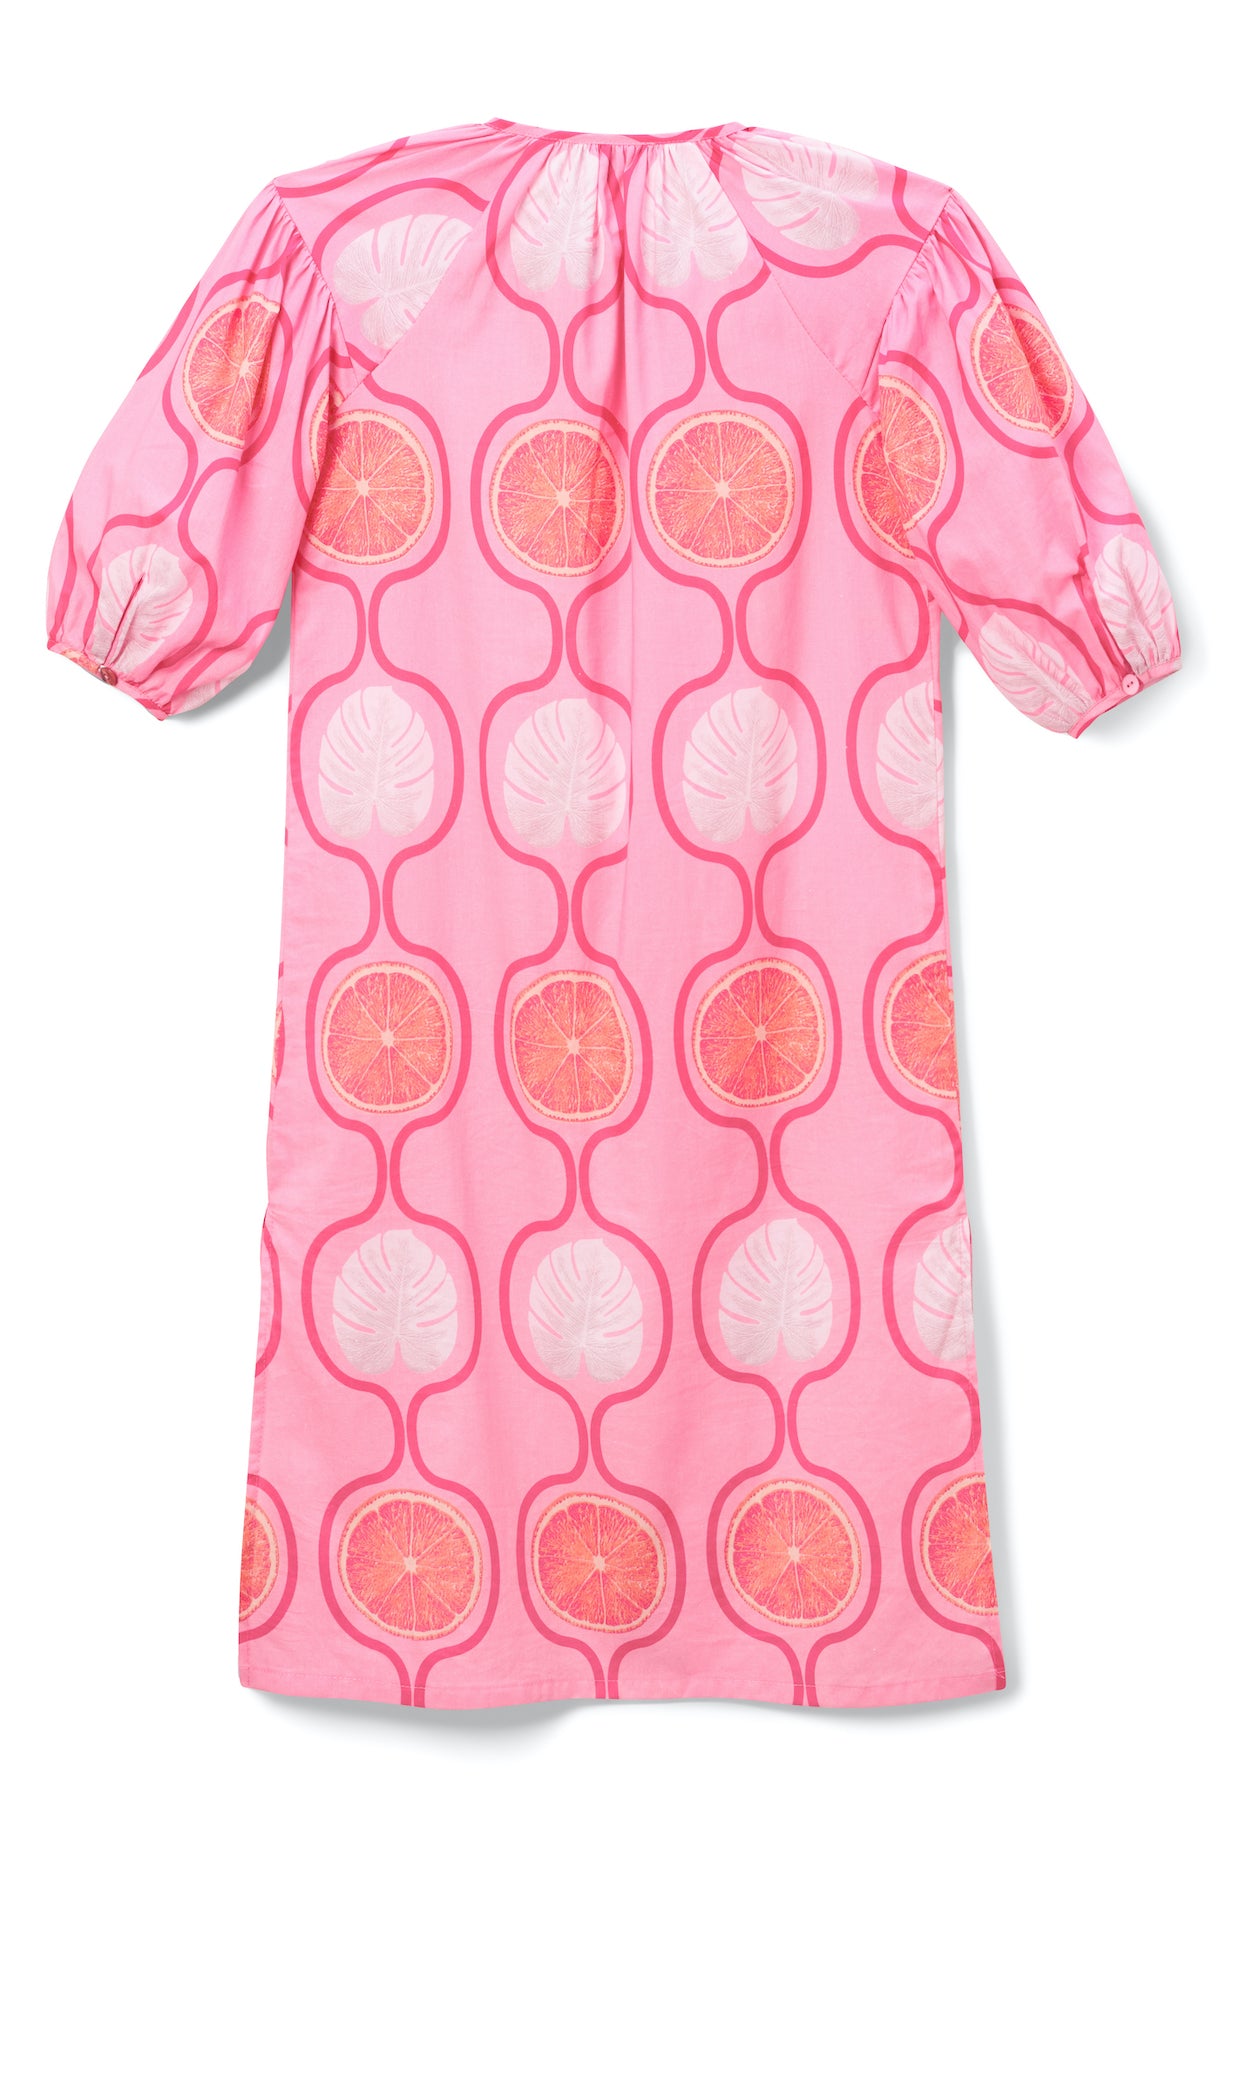 Children's South Beach Cover-up